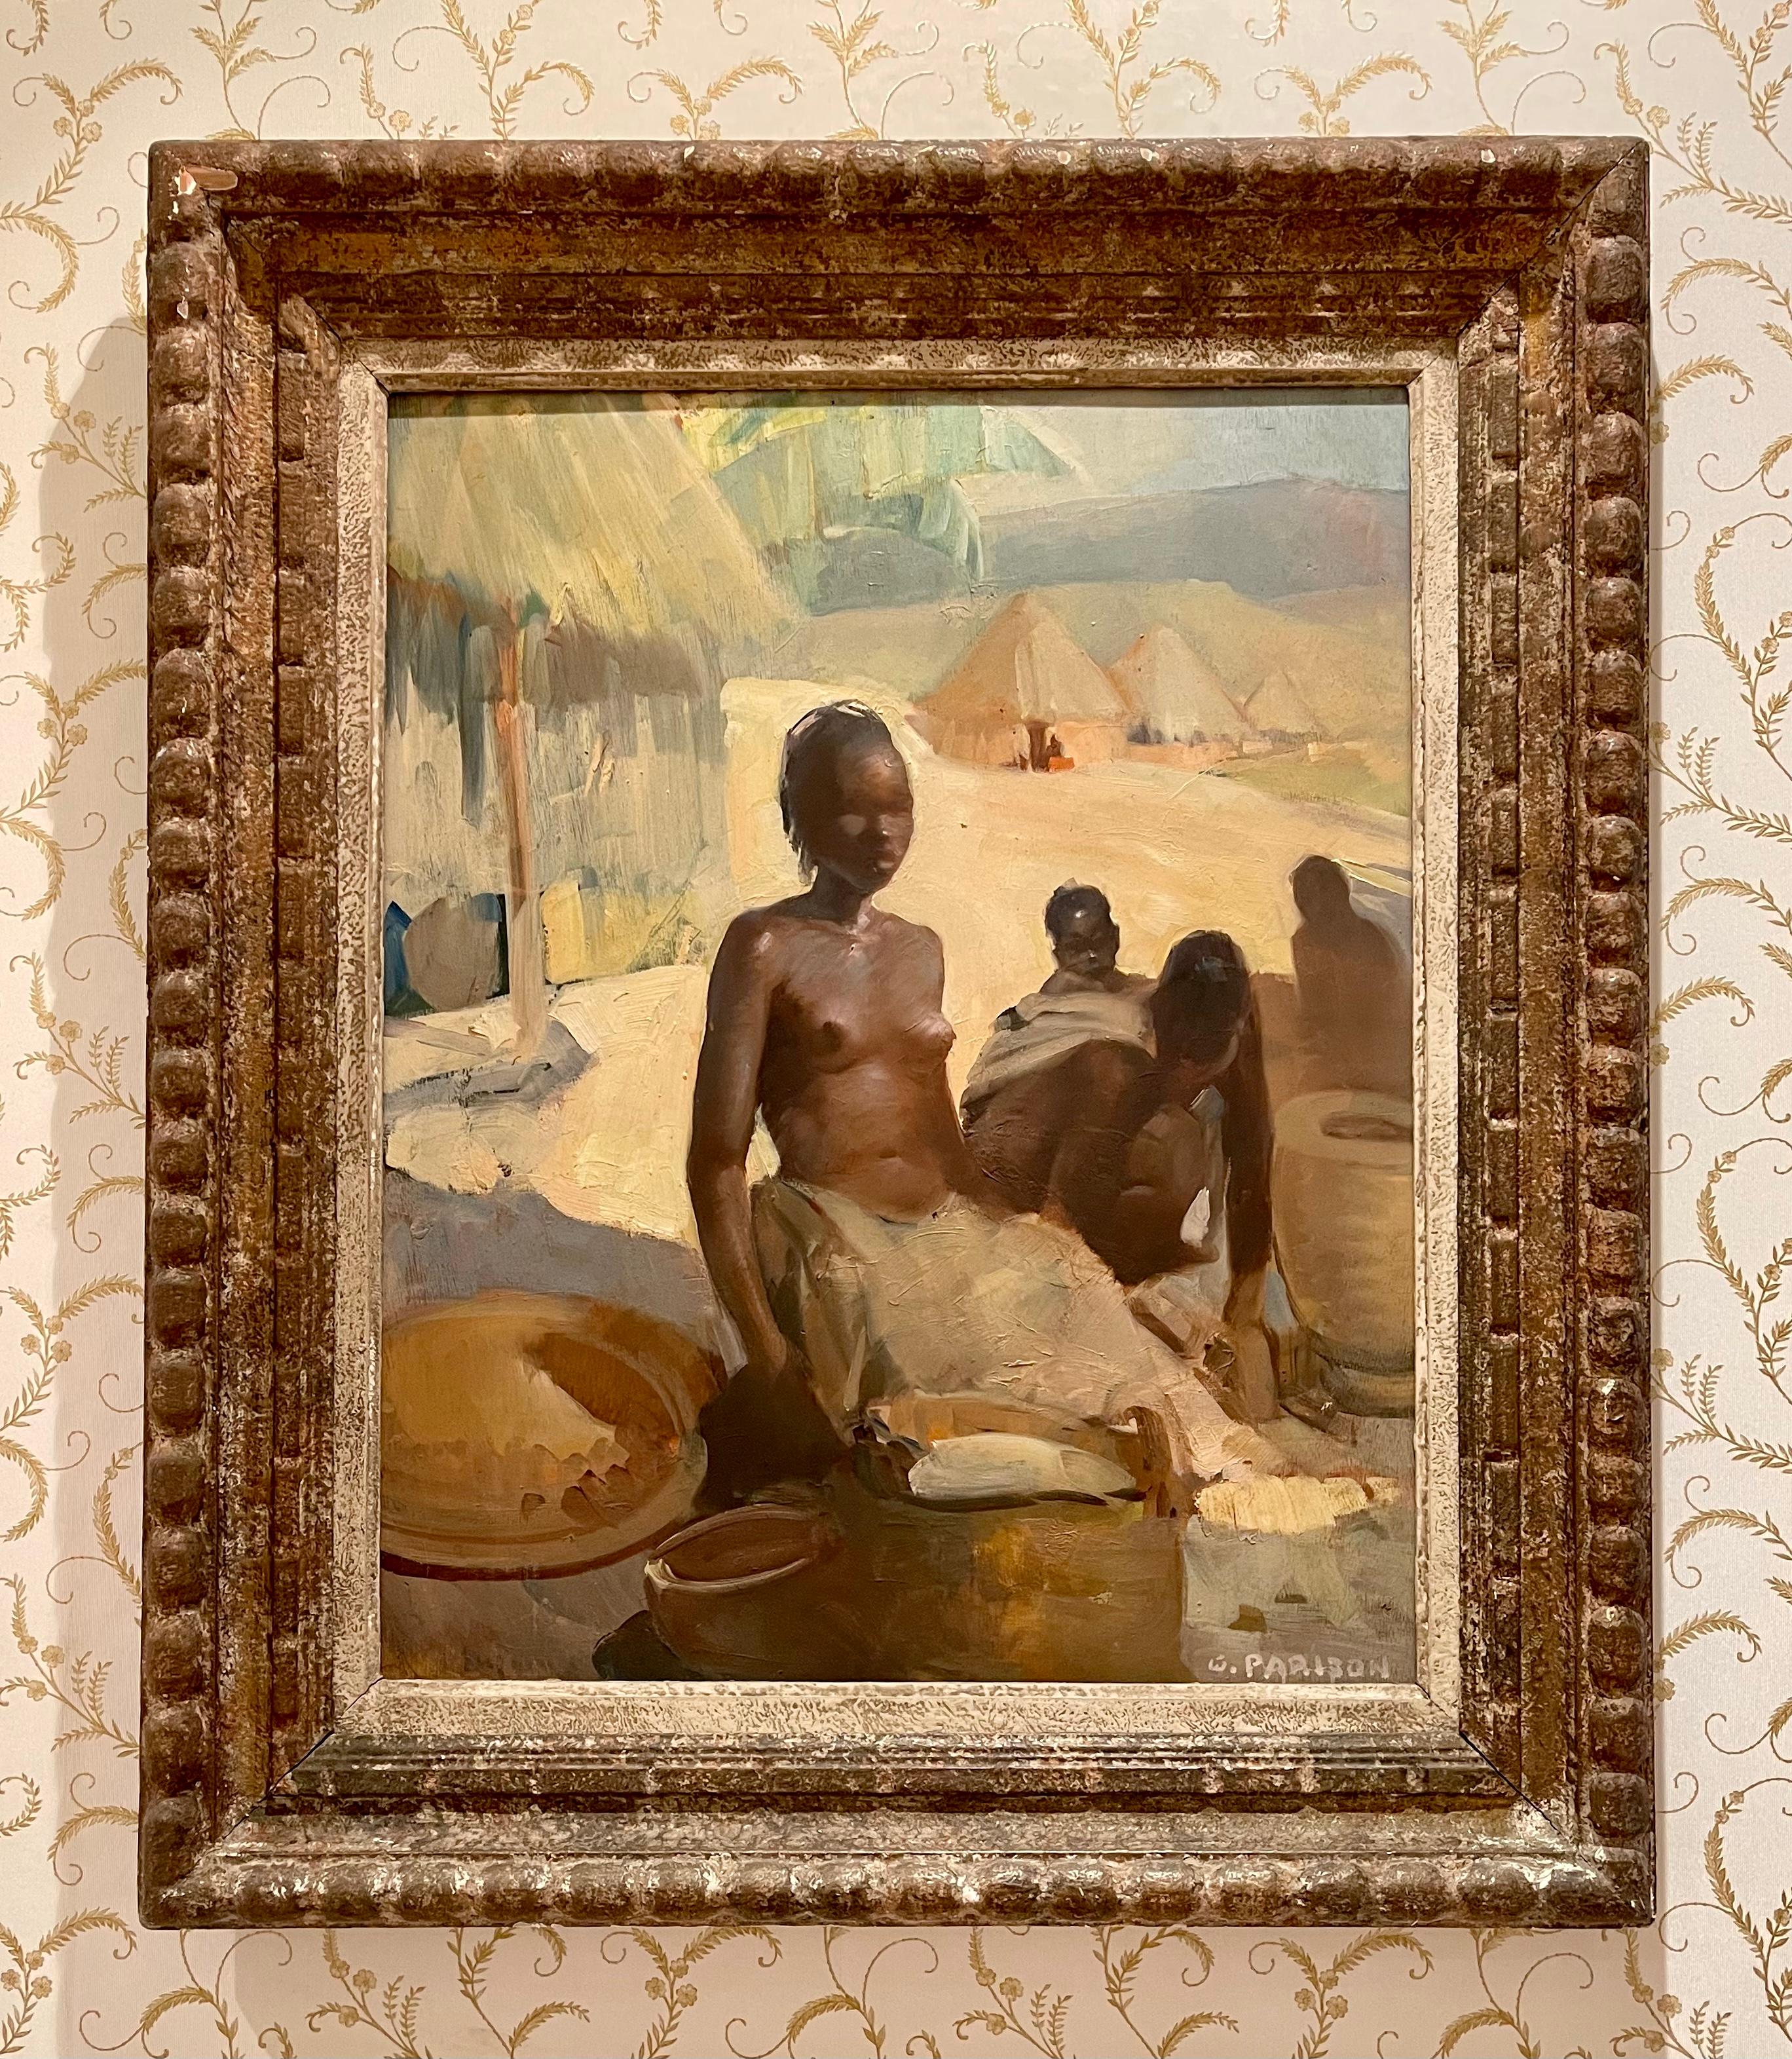 Painting, oil on panel, representing Malagasy women with their children preparing the meal in the heart of the village. This canvas is in very good condition, signed lower right 